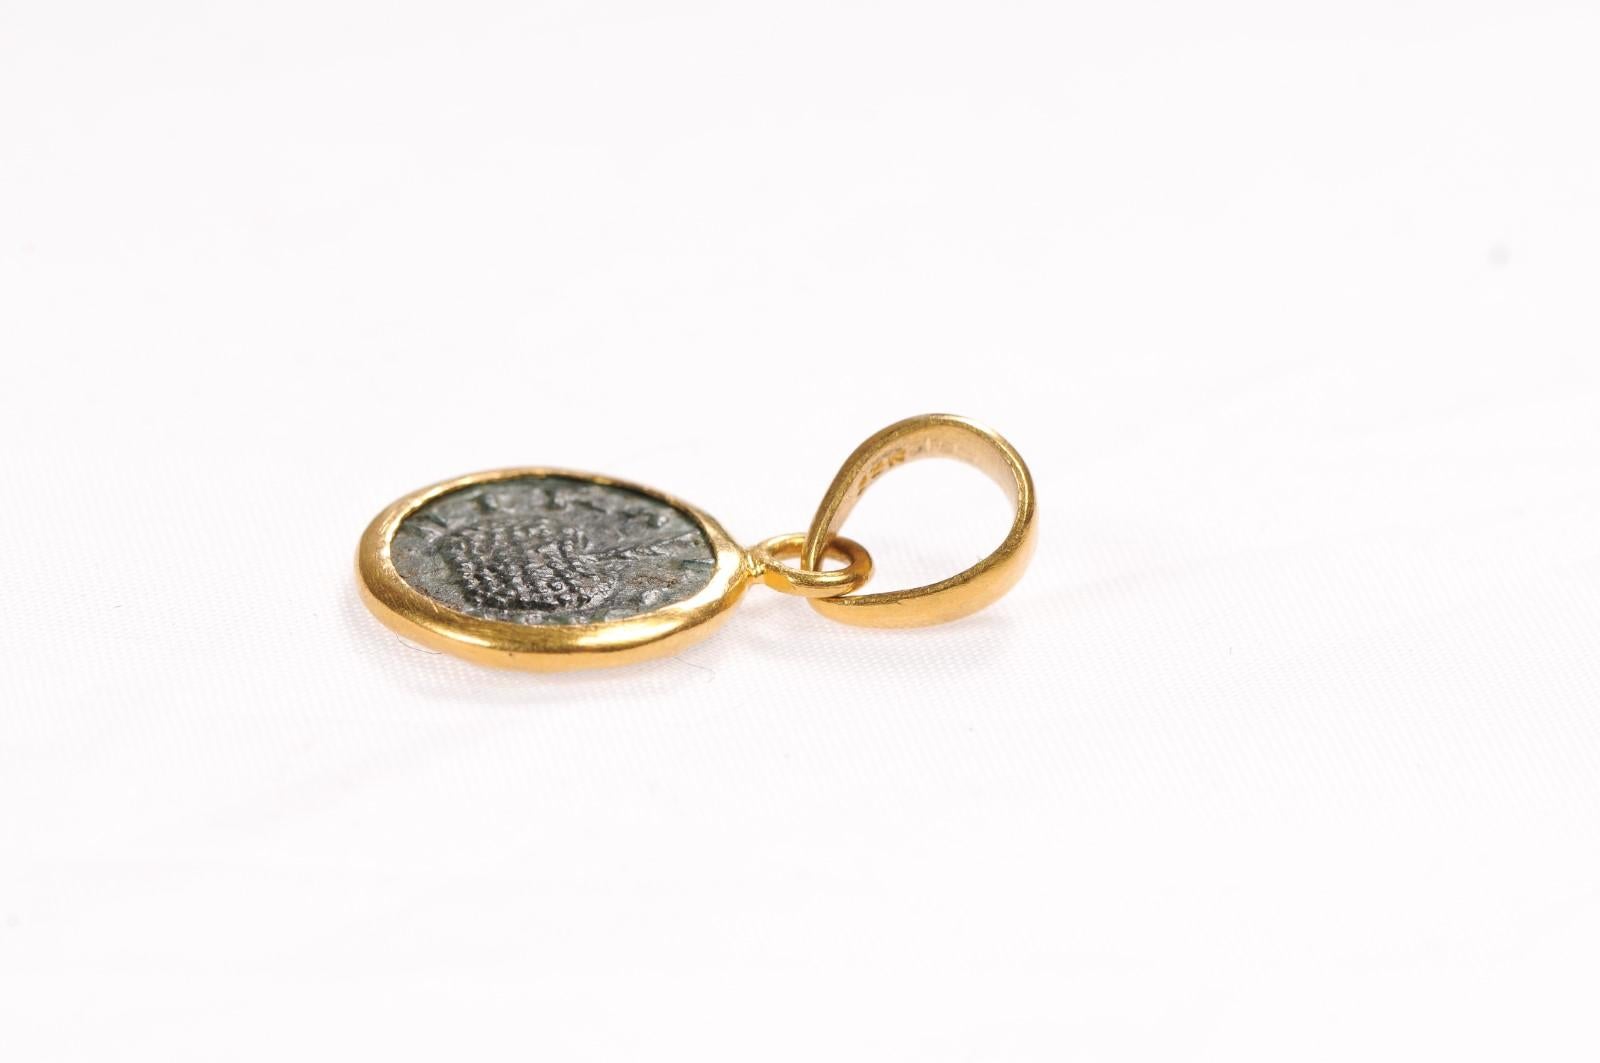 Roman Coin & Pyrite Necklace (pendant only) For Sale 5